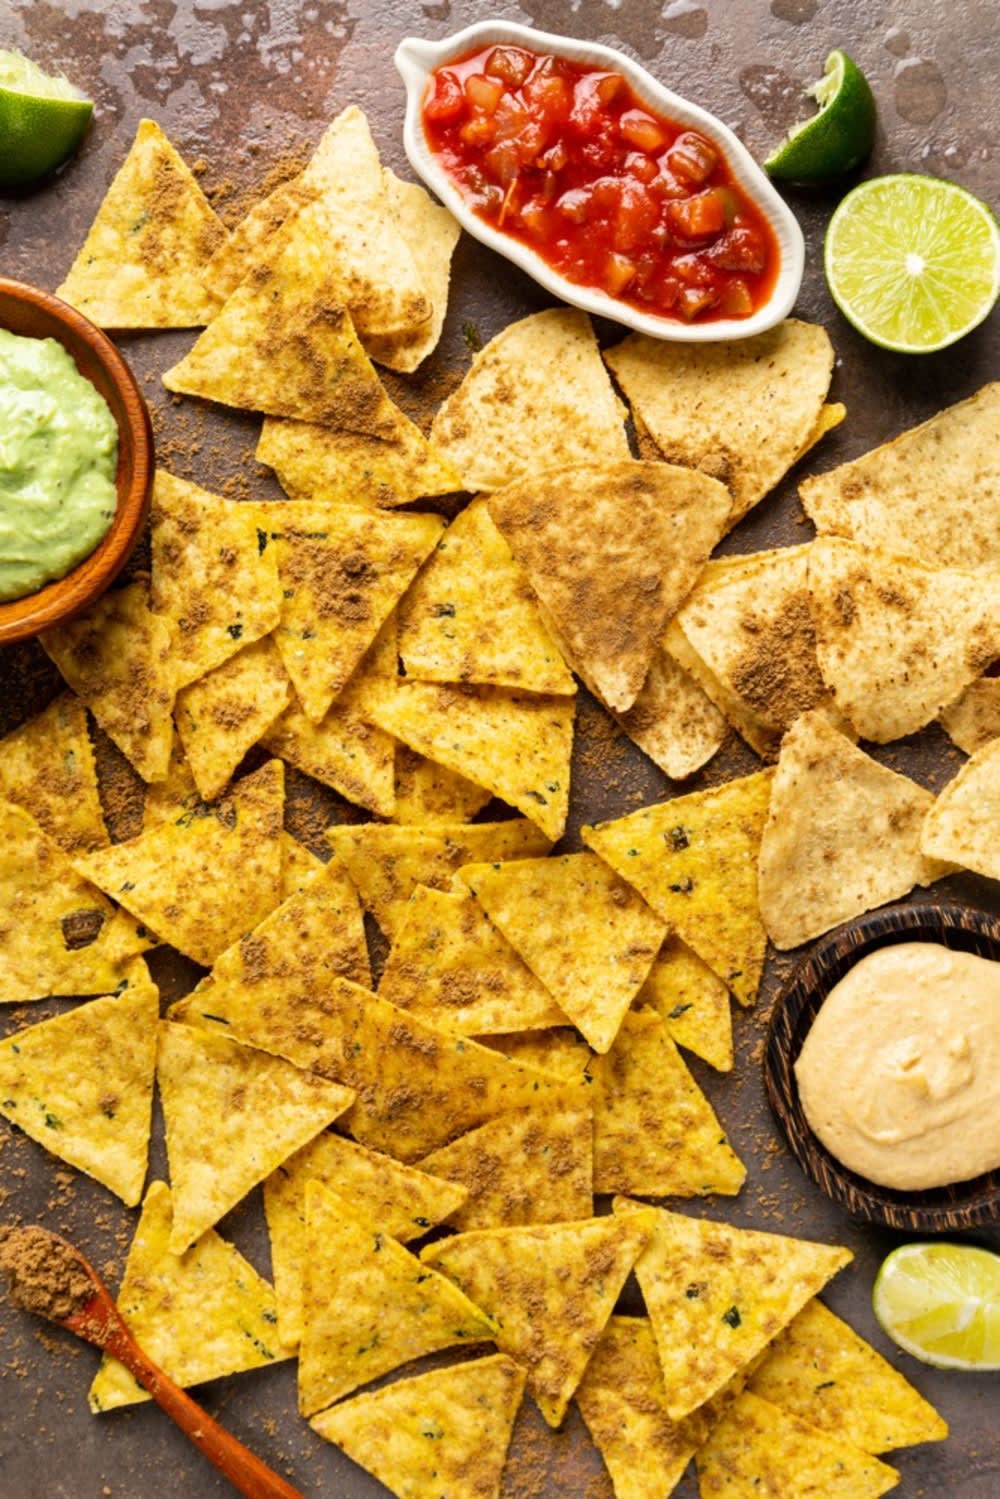 Plant- and insect-based tortilla chips